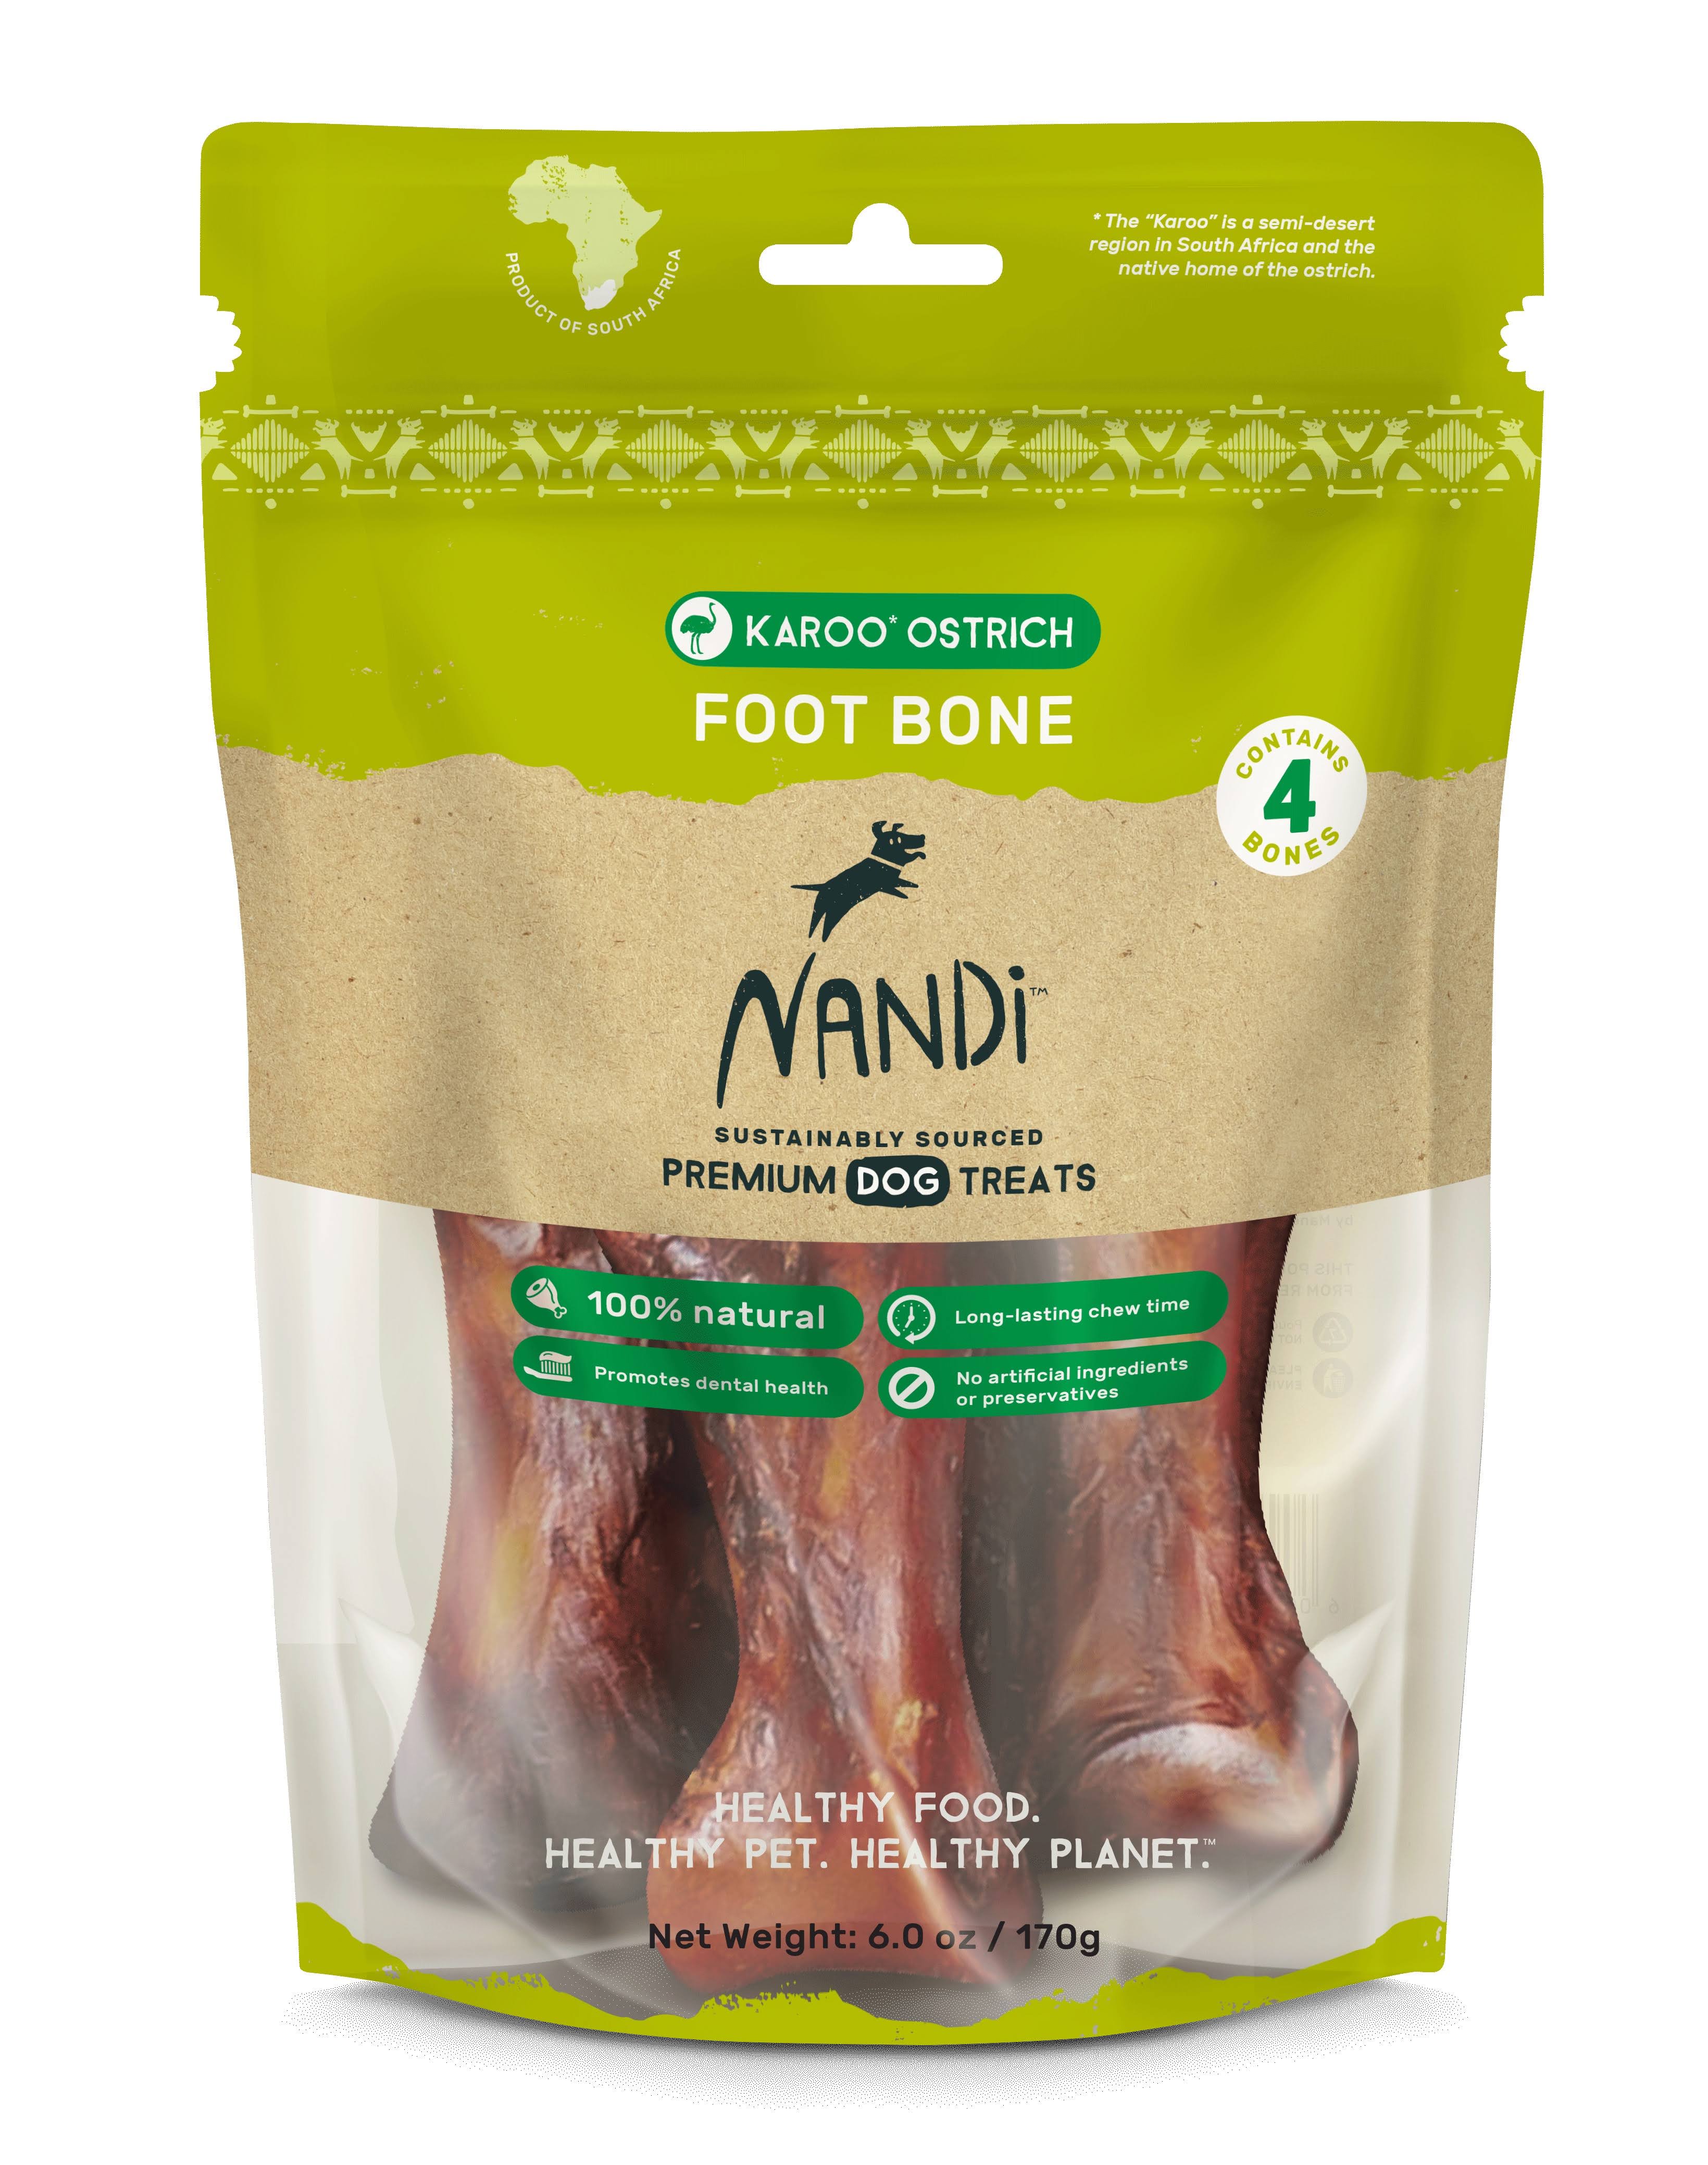 Nandi All-Natural South African Karoo Ostrich Foot Bone (4pk) | Single Ingredient, Long-Lasting Chew Time, Sustainably Sourced, Nutrient Rich